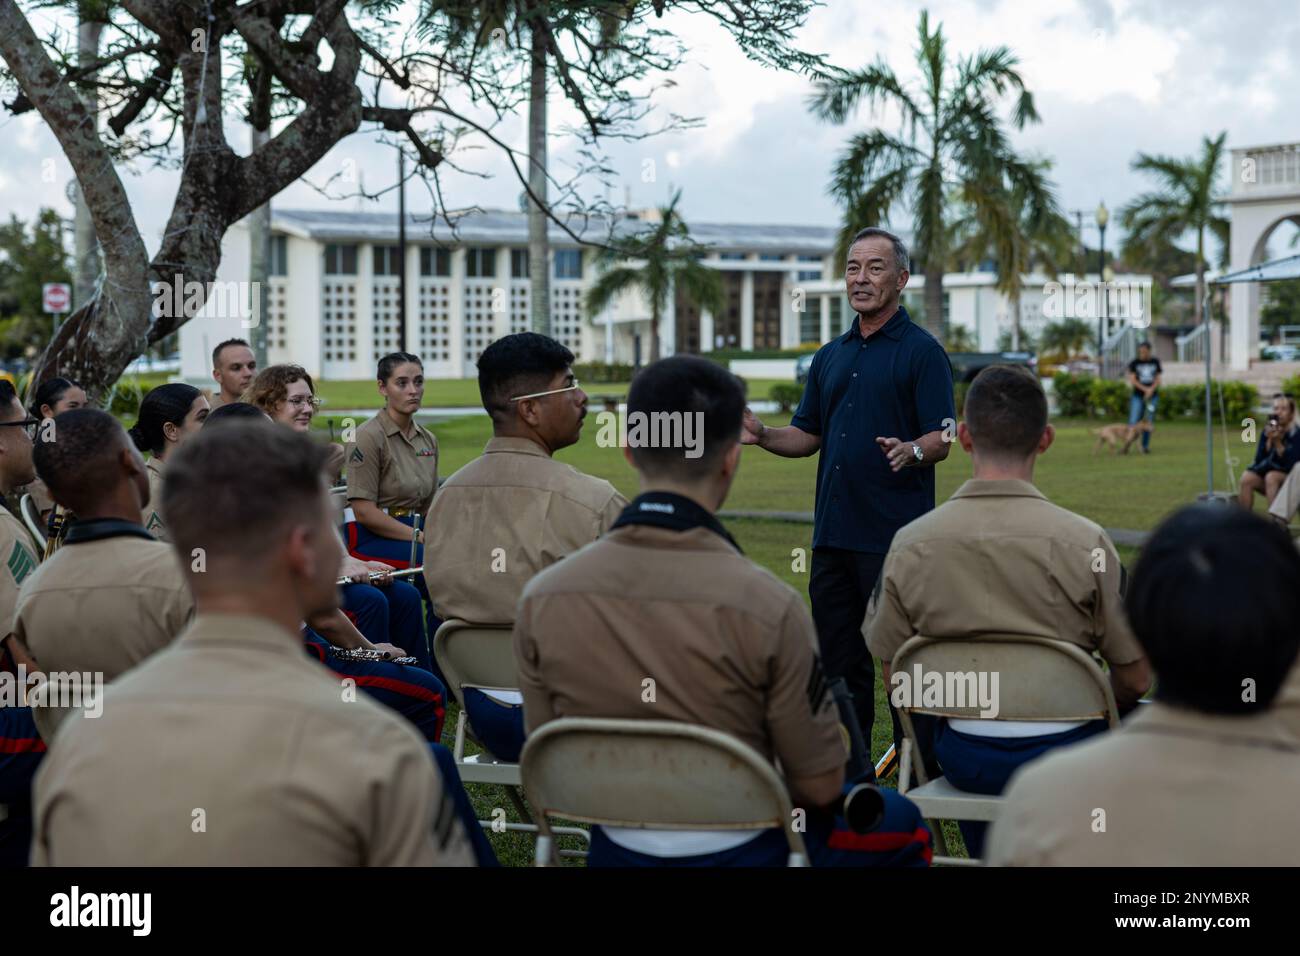 U.S. Congressman James Moylan, who will serve on the House Armed Forces and natural resources committee of Guam, speaks to U.S. Marines with Marine Corps Forces Pacific Band before a musical performance at Plaza de Espana, Hagatna, Guam, Jan. 23, 2023.  The MARFORPAC Band participated in multiple community engagements during their visit to Guam as part of the Naval Support Activity, Marine Corps Base Camp Blaz Reactivation and Naming Ceremony. In order to encourage music education and showcase the vibrant history and tradition of military music, the band is active in providing clinics and conc Stock Photo